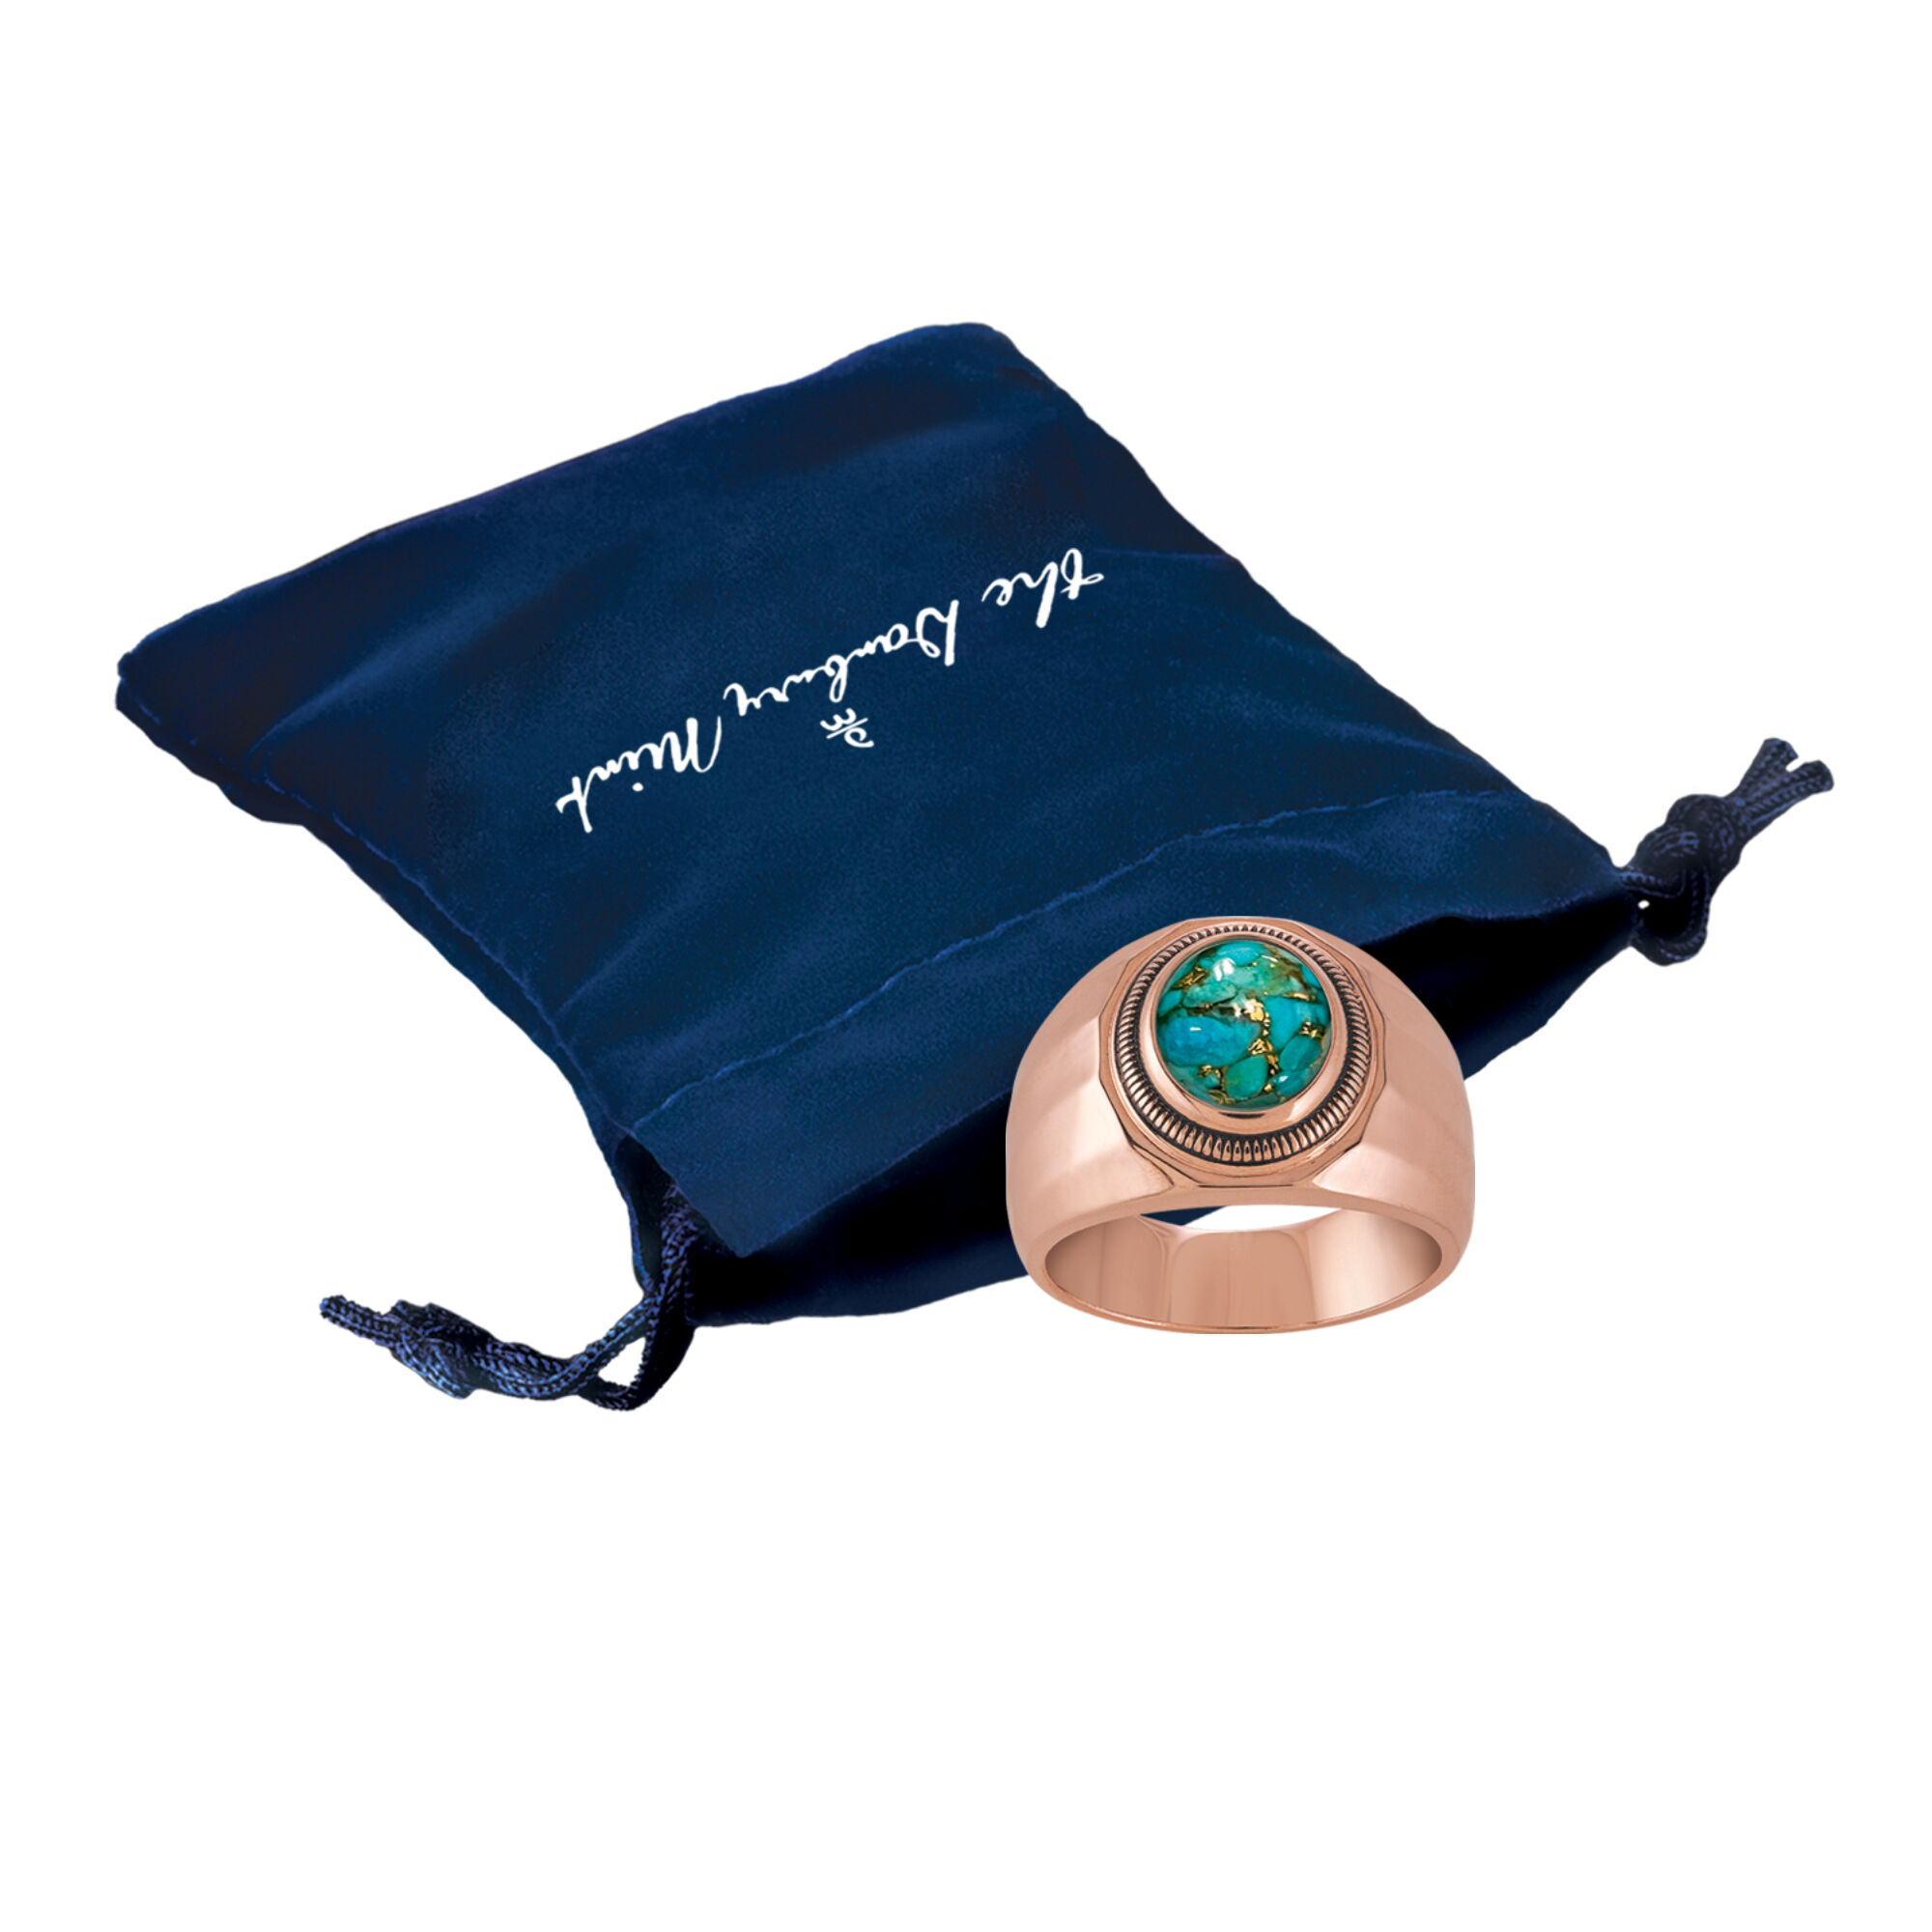 Restoration Mens Turquoise Copper Ring 10824 0011 g gift pouch